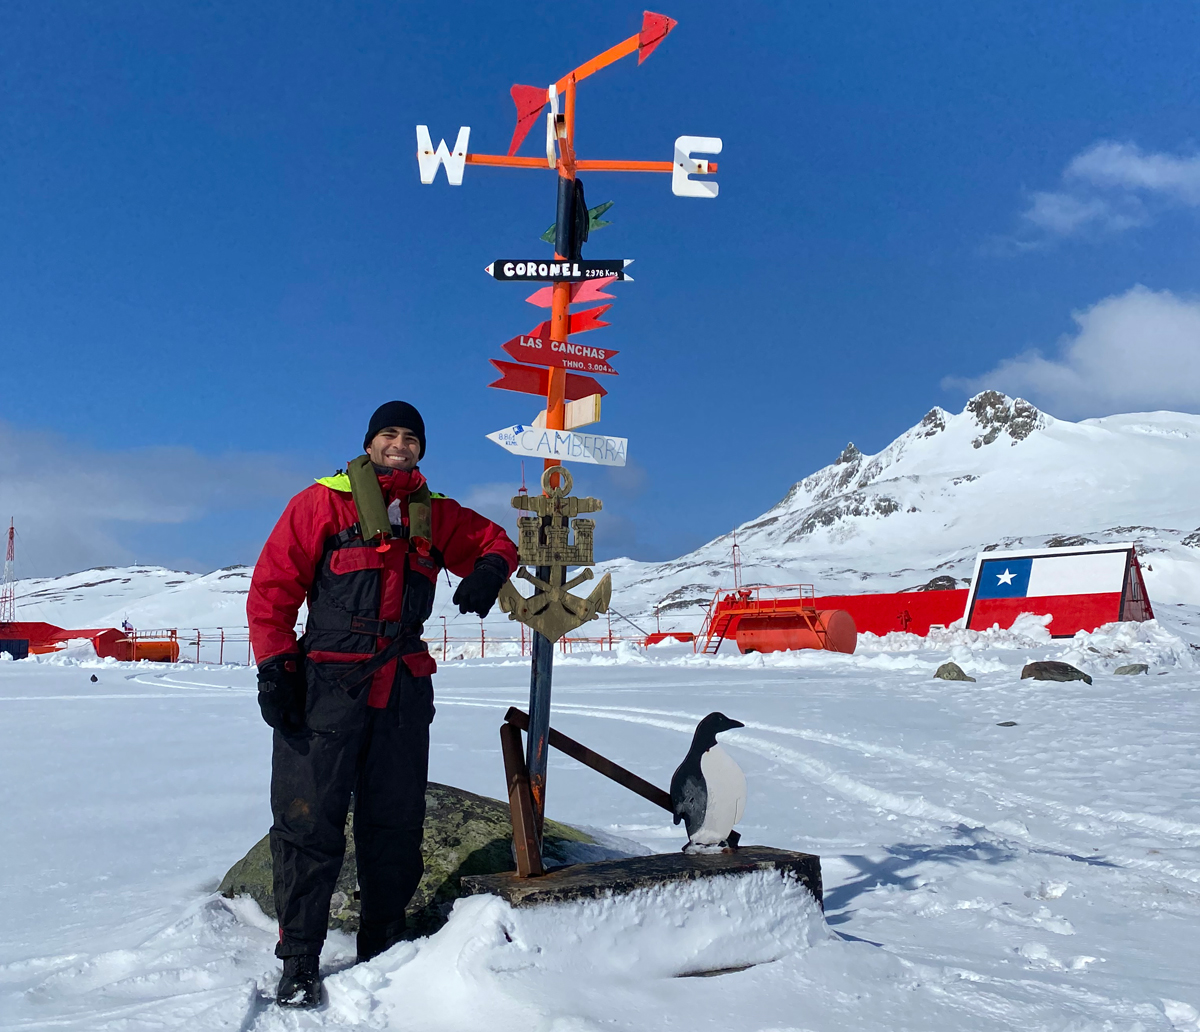 A/SLt Kayvan Aflaki stands with a landmark signpost at Captain Arturo Prat Base, a Chilean Antarctic research station located on Greenwich Island, after completing a replenishment with the crew members of Chilean offshore patrol vessel Marinero Fuentealba. Photo: ST Felipe Olea.
